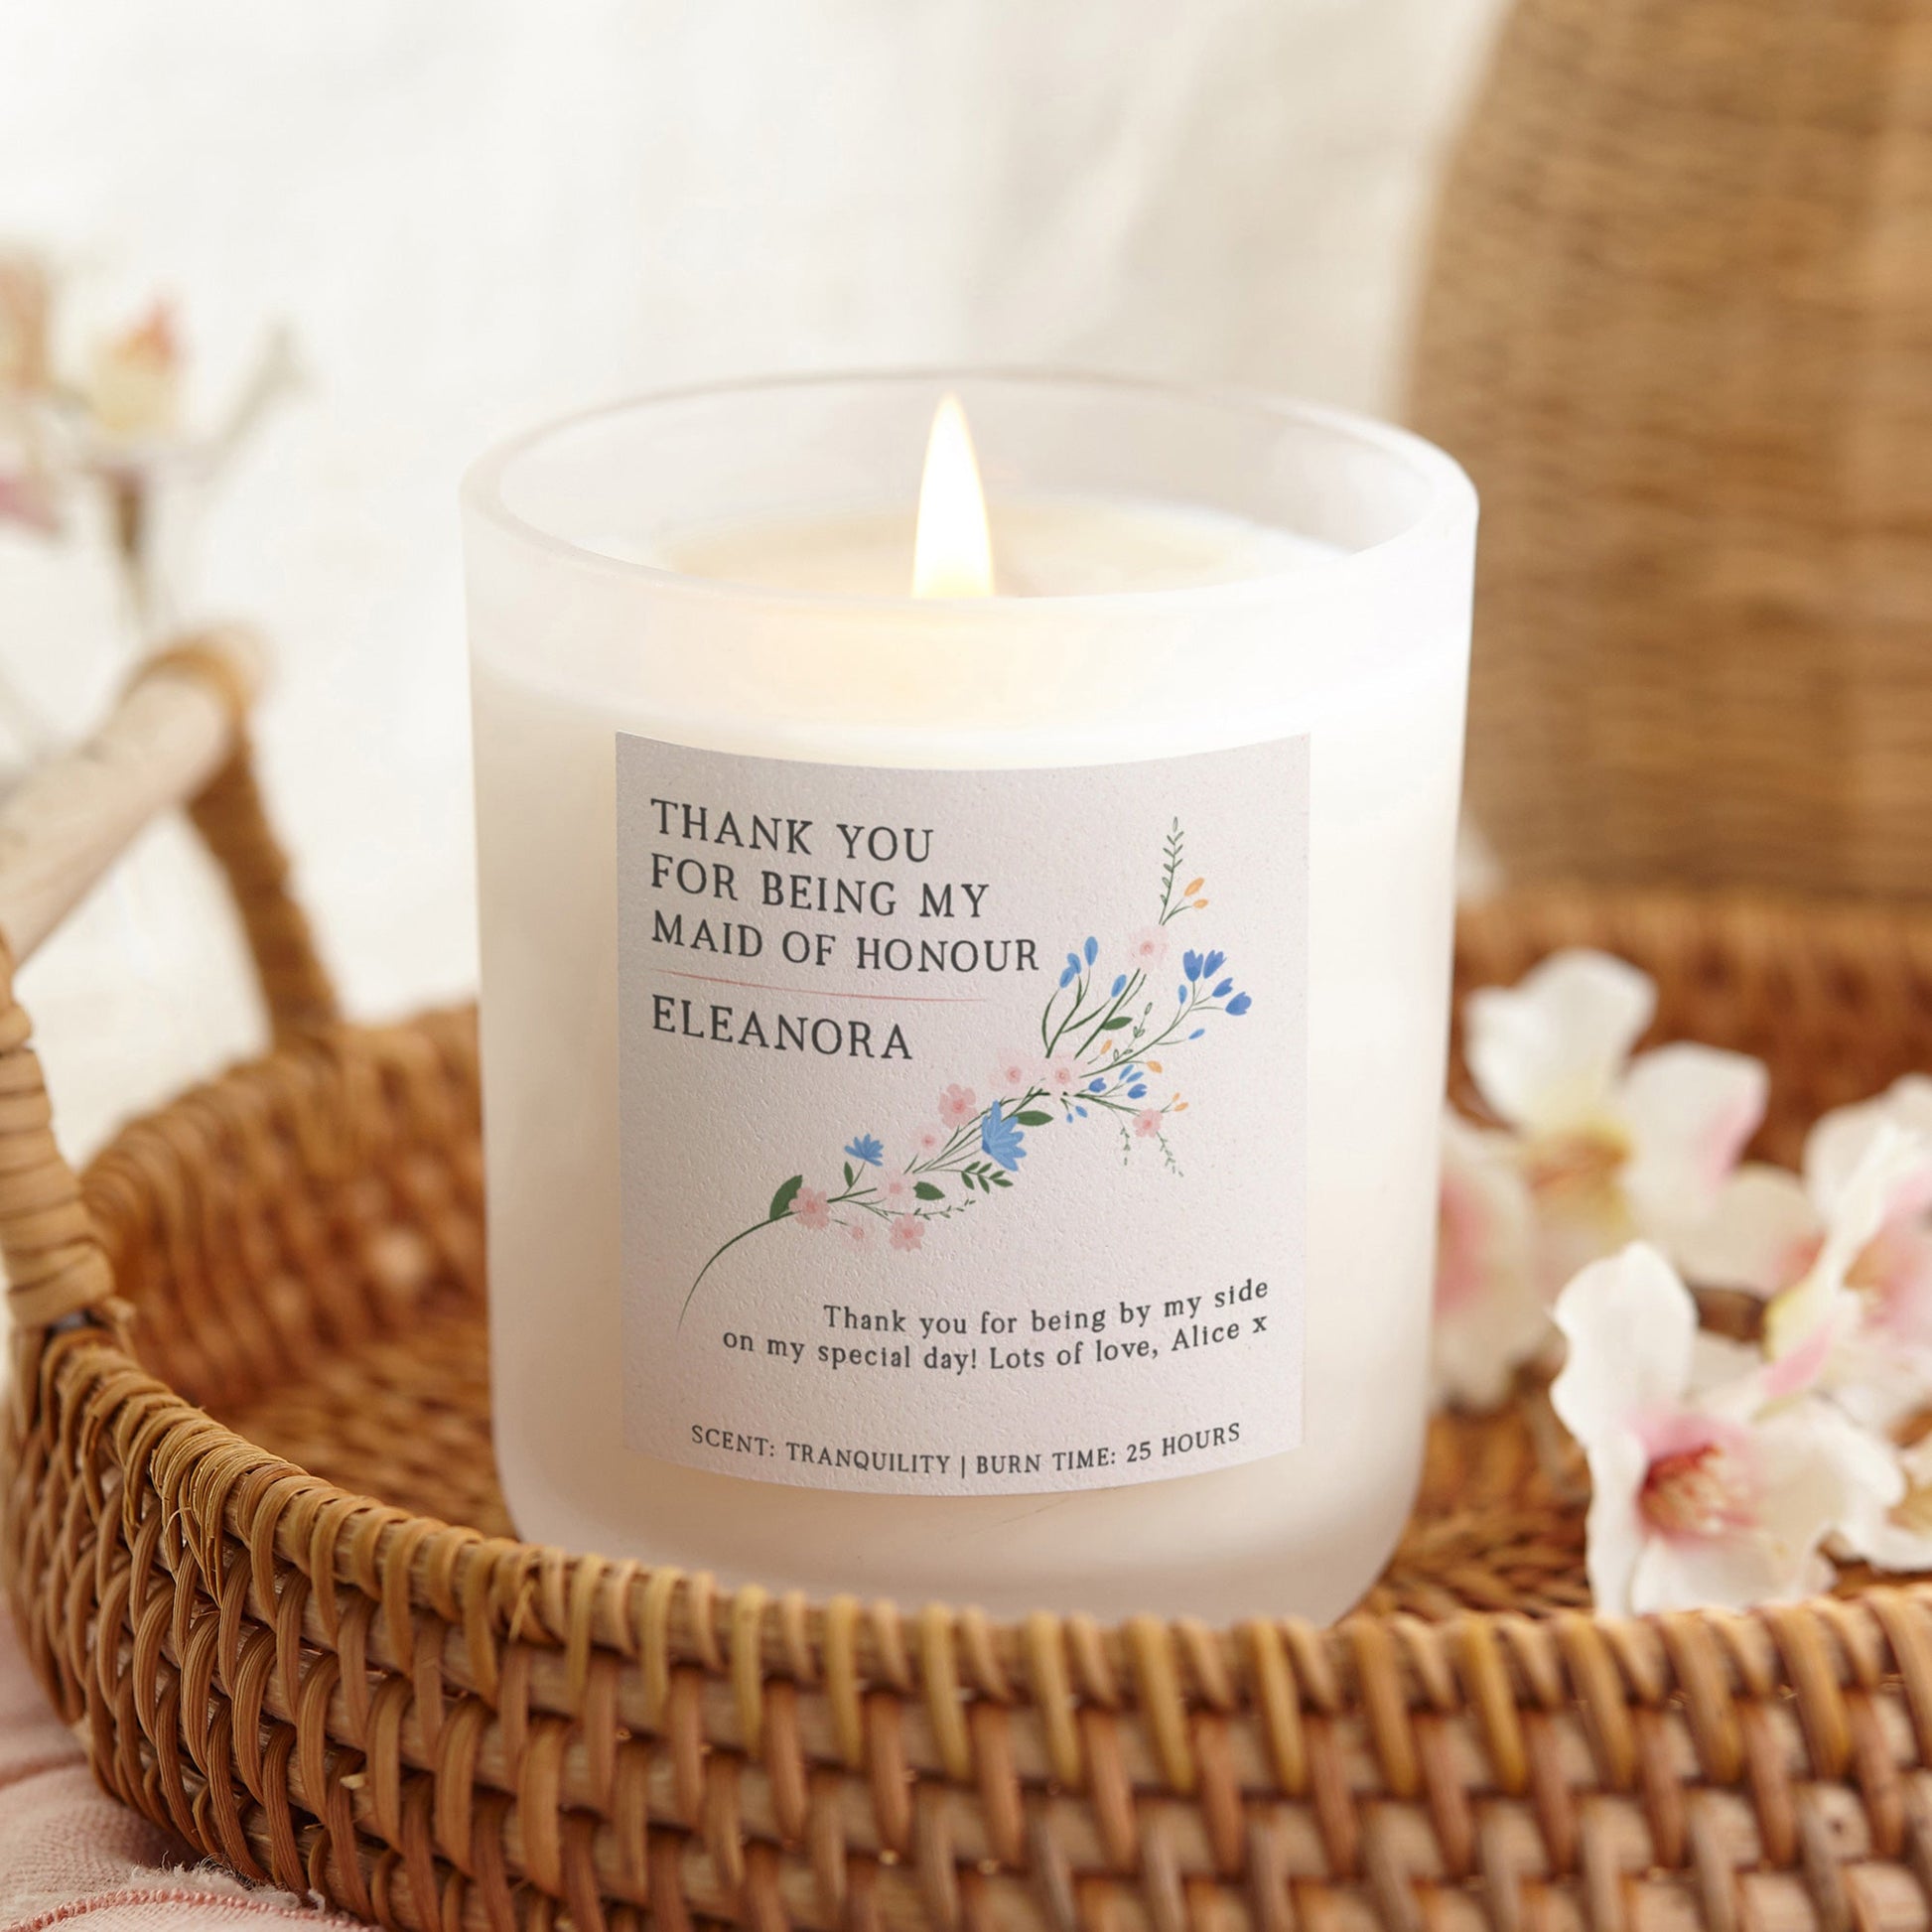 Maid of Honour Gift Floral Candle - Kindred Fires